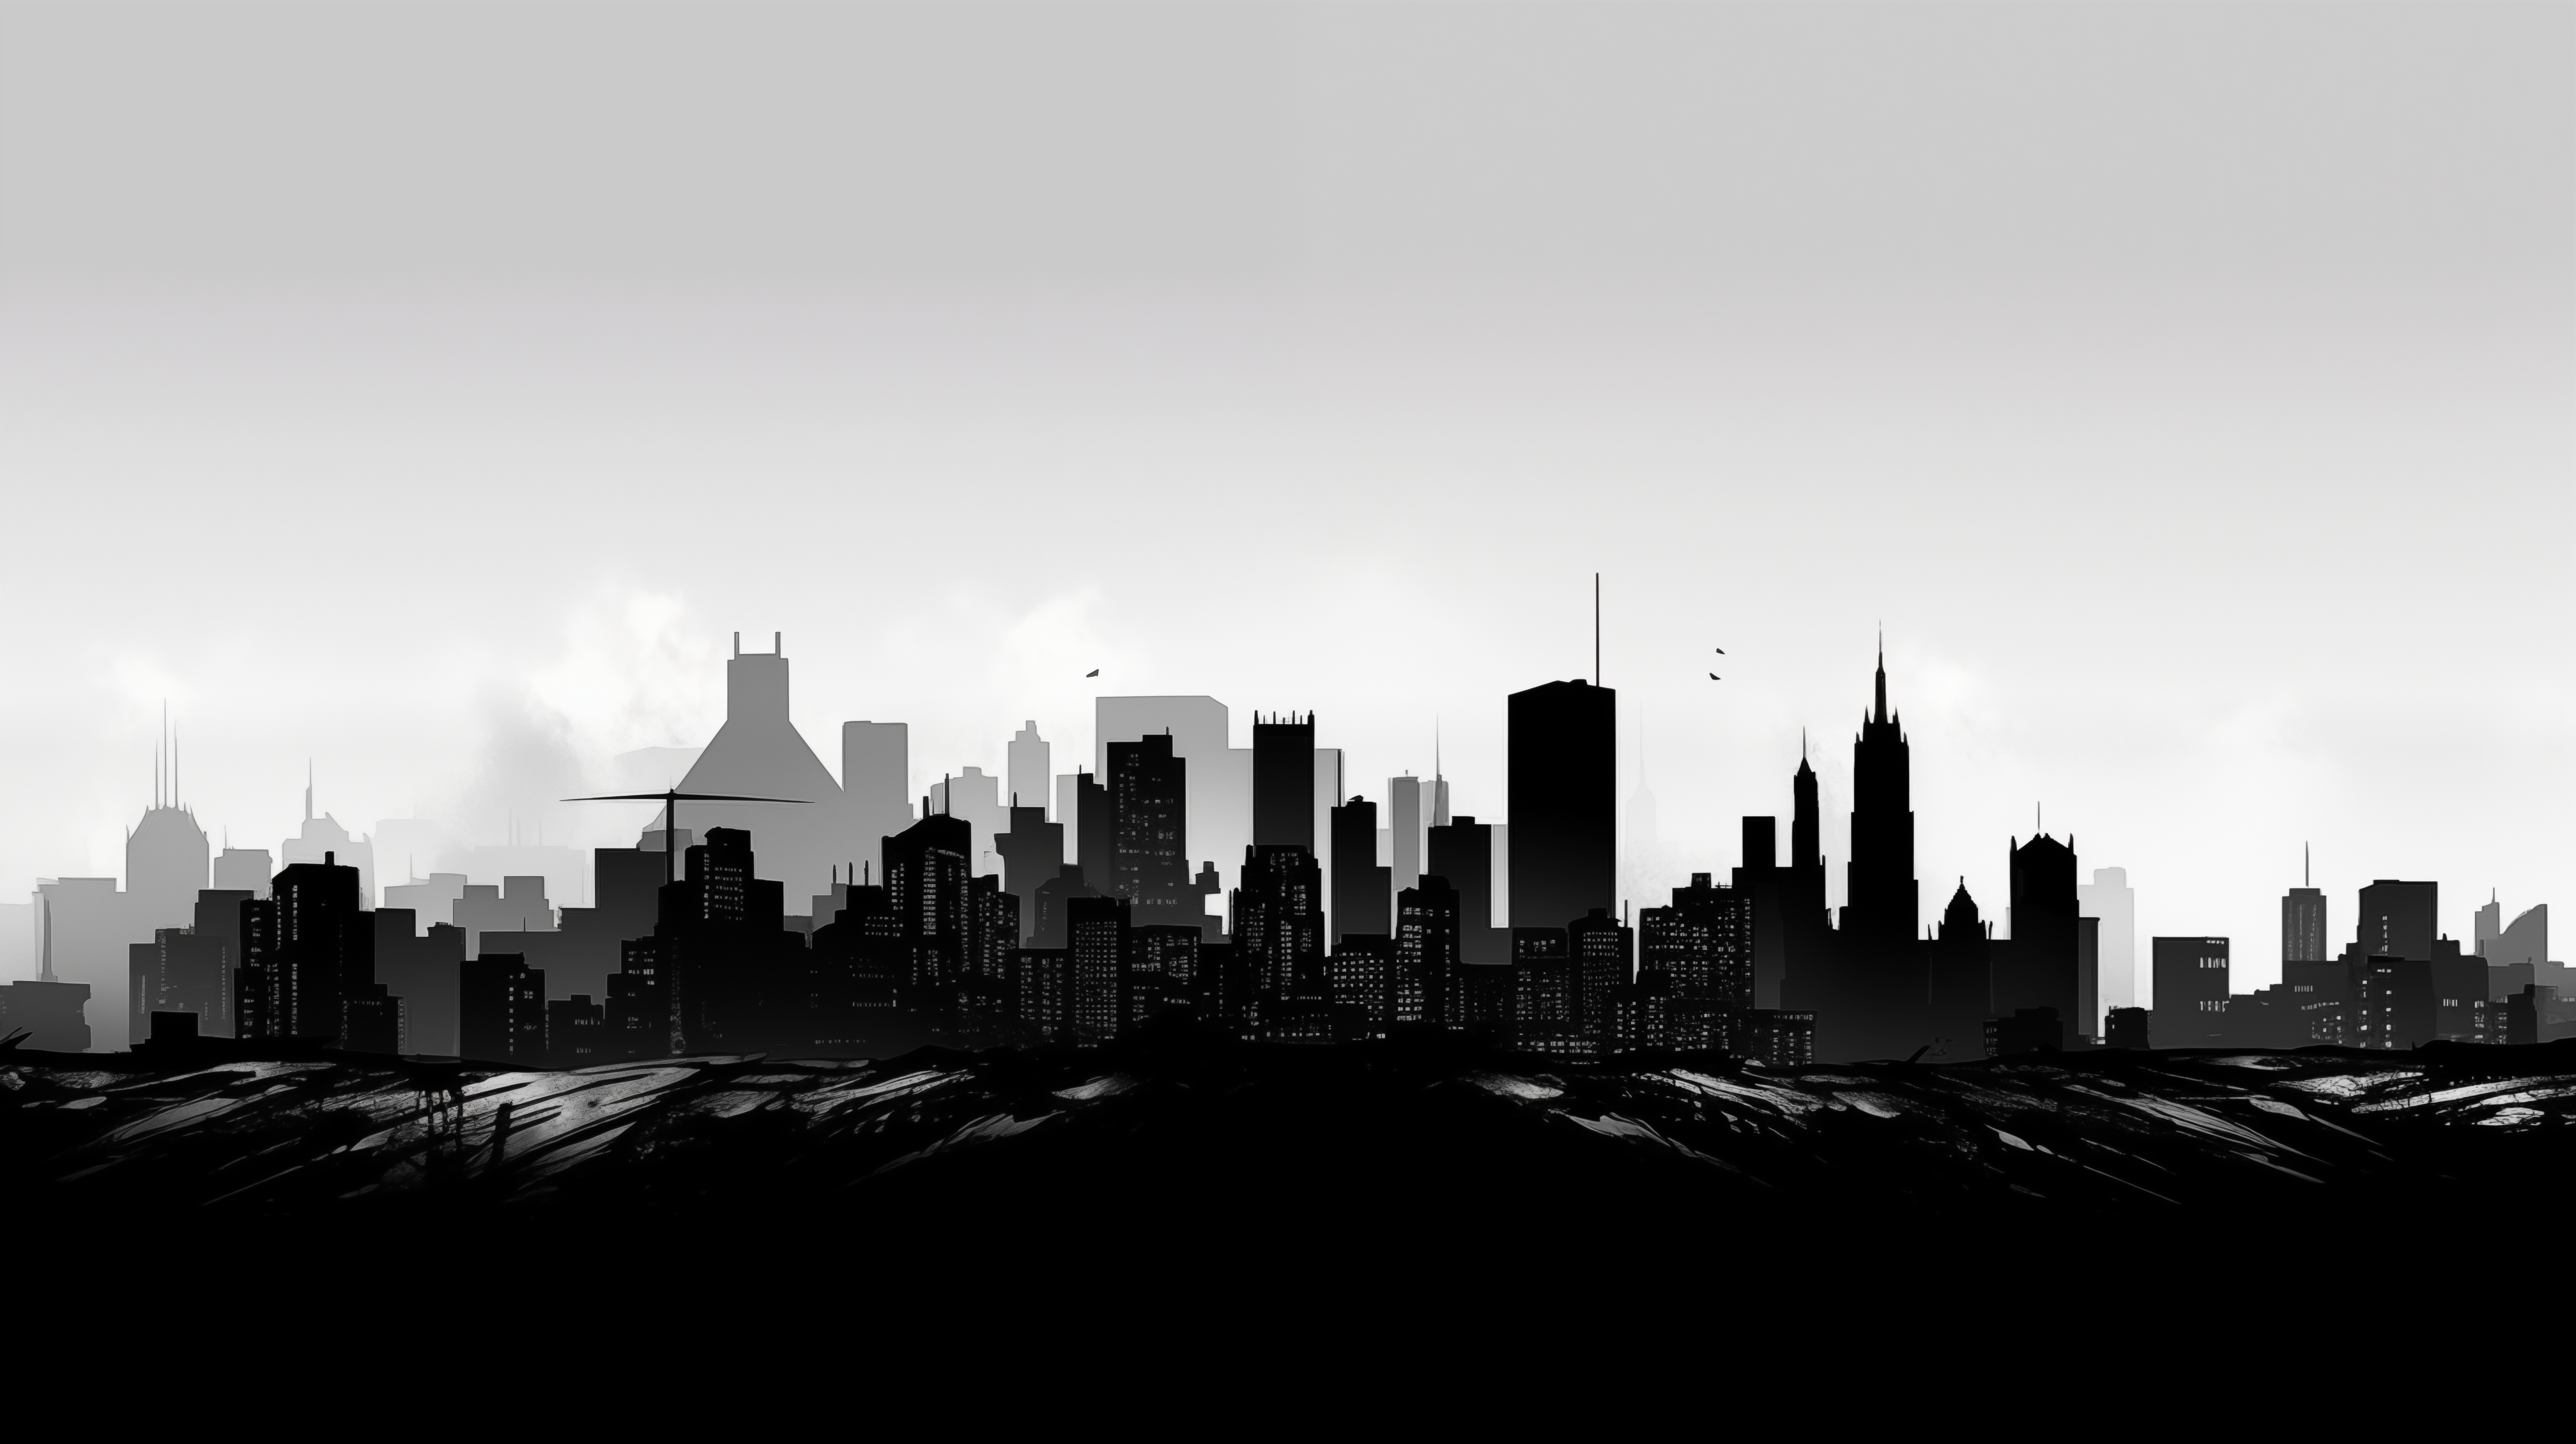 Monochrome cityscape silhouette HD desktop wallpaper and background with urban skyline.